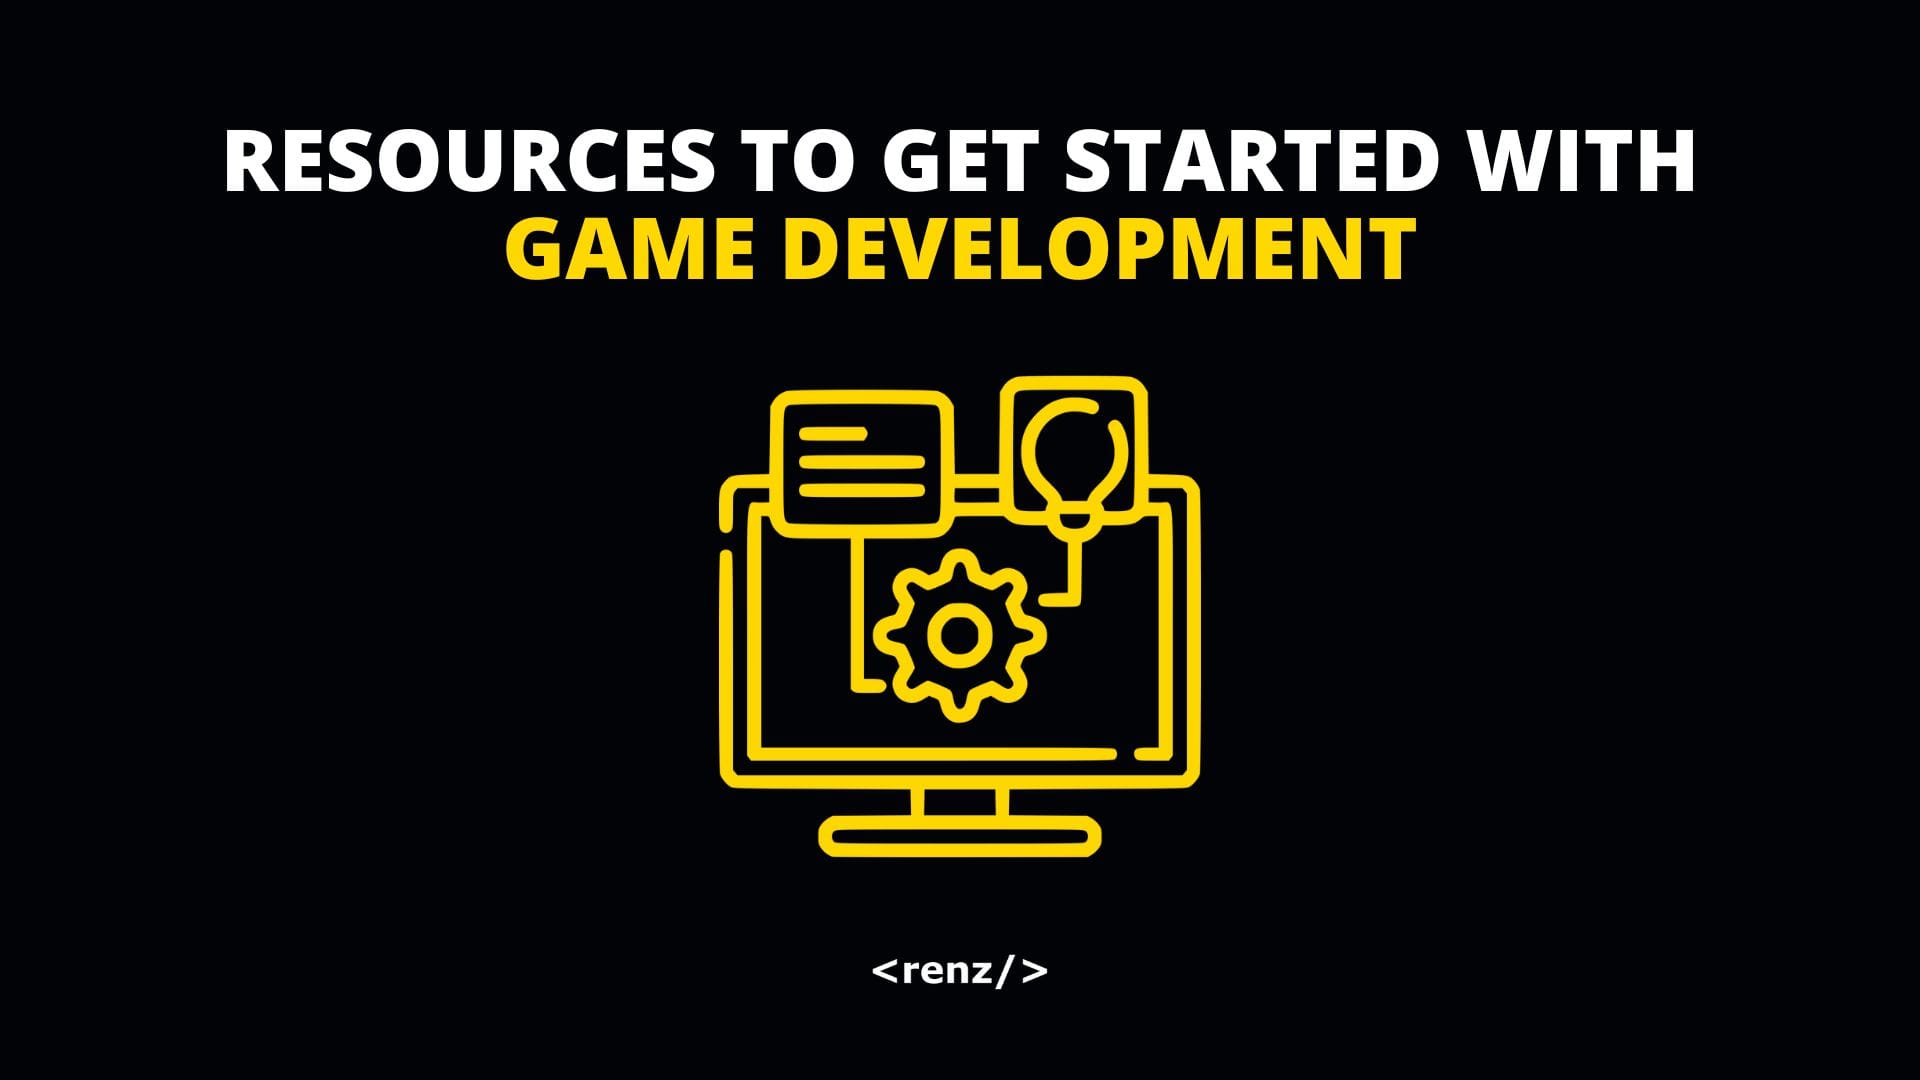 Resources to Get Started With Game Development